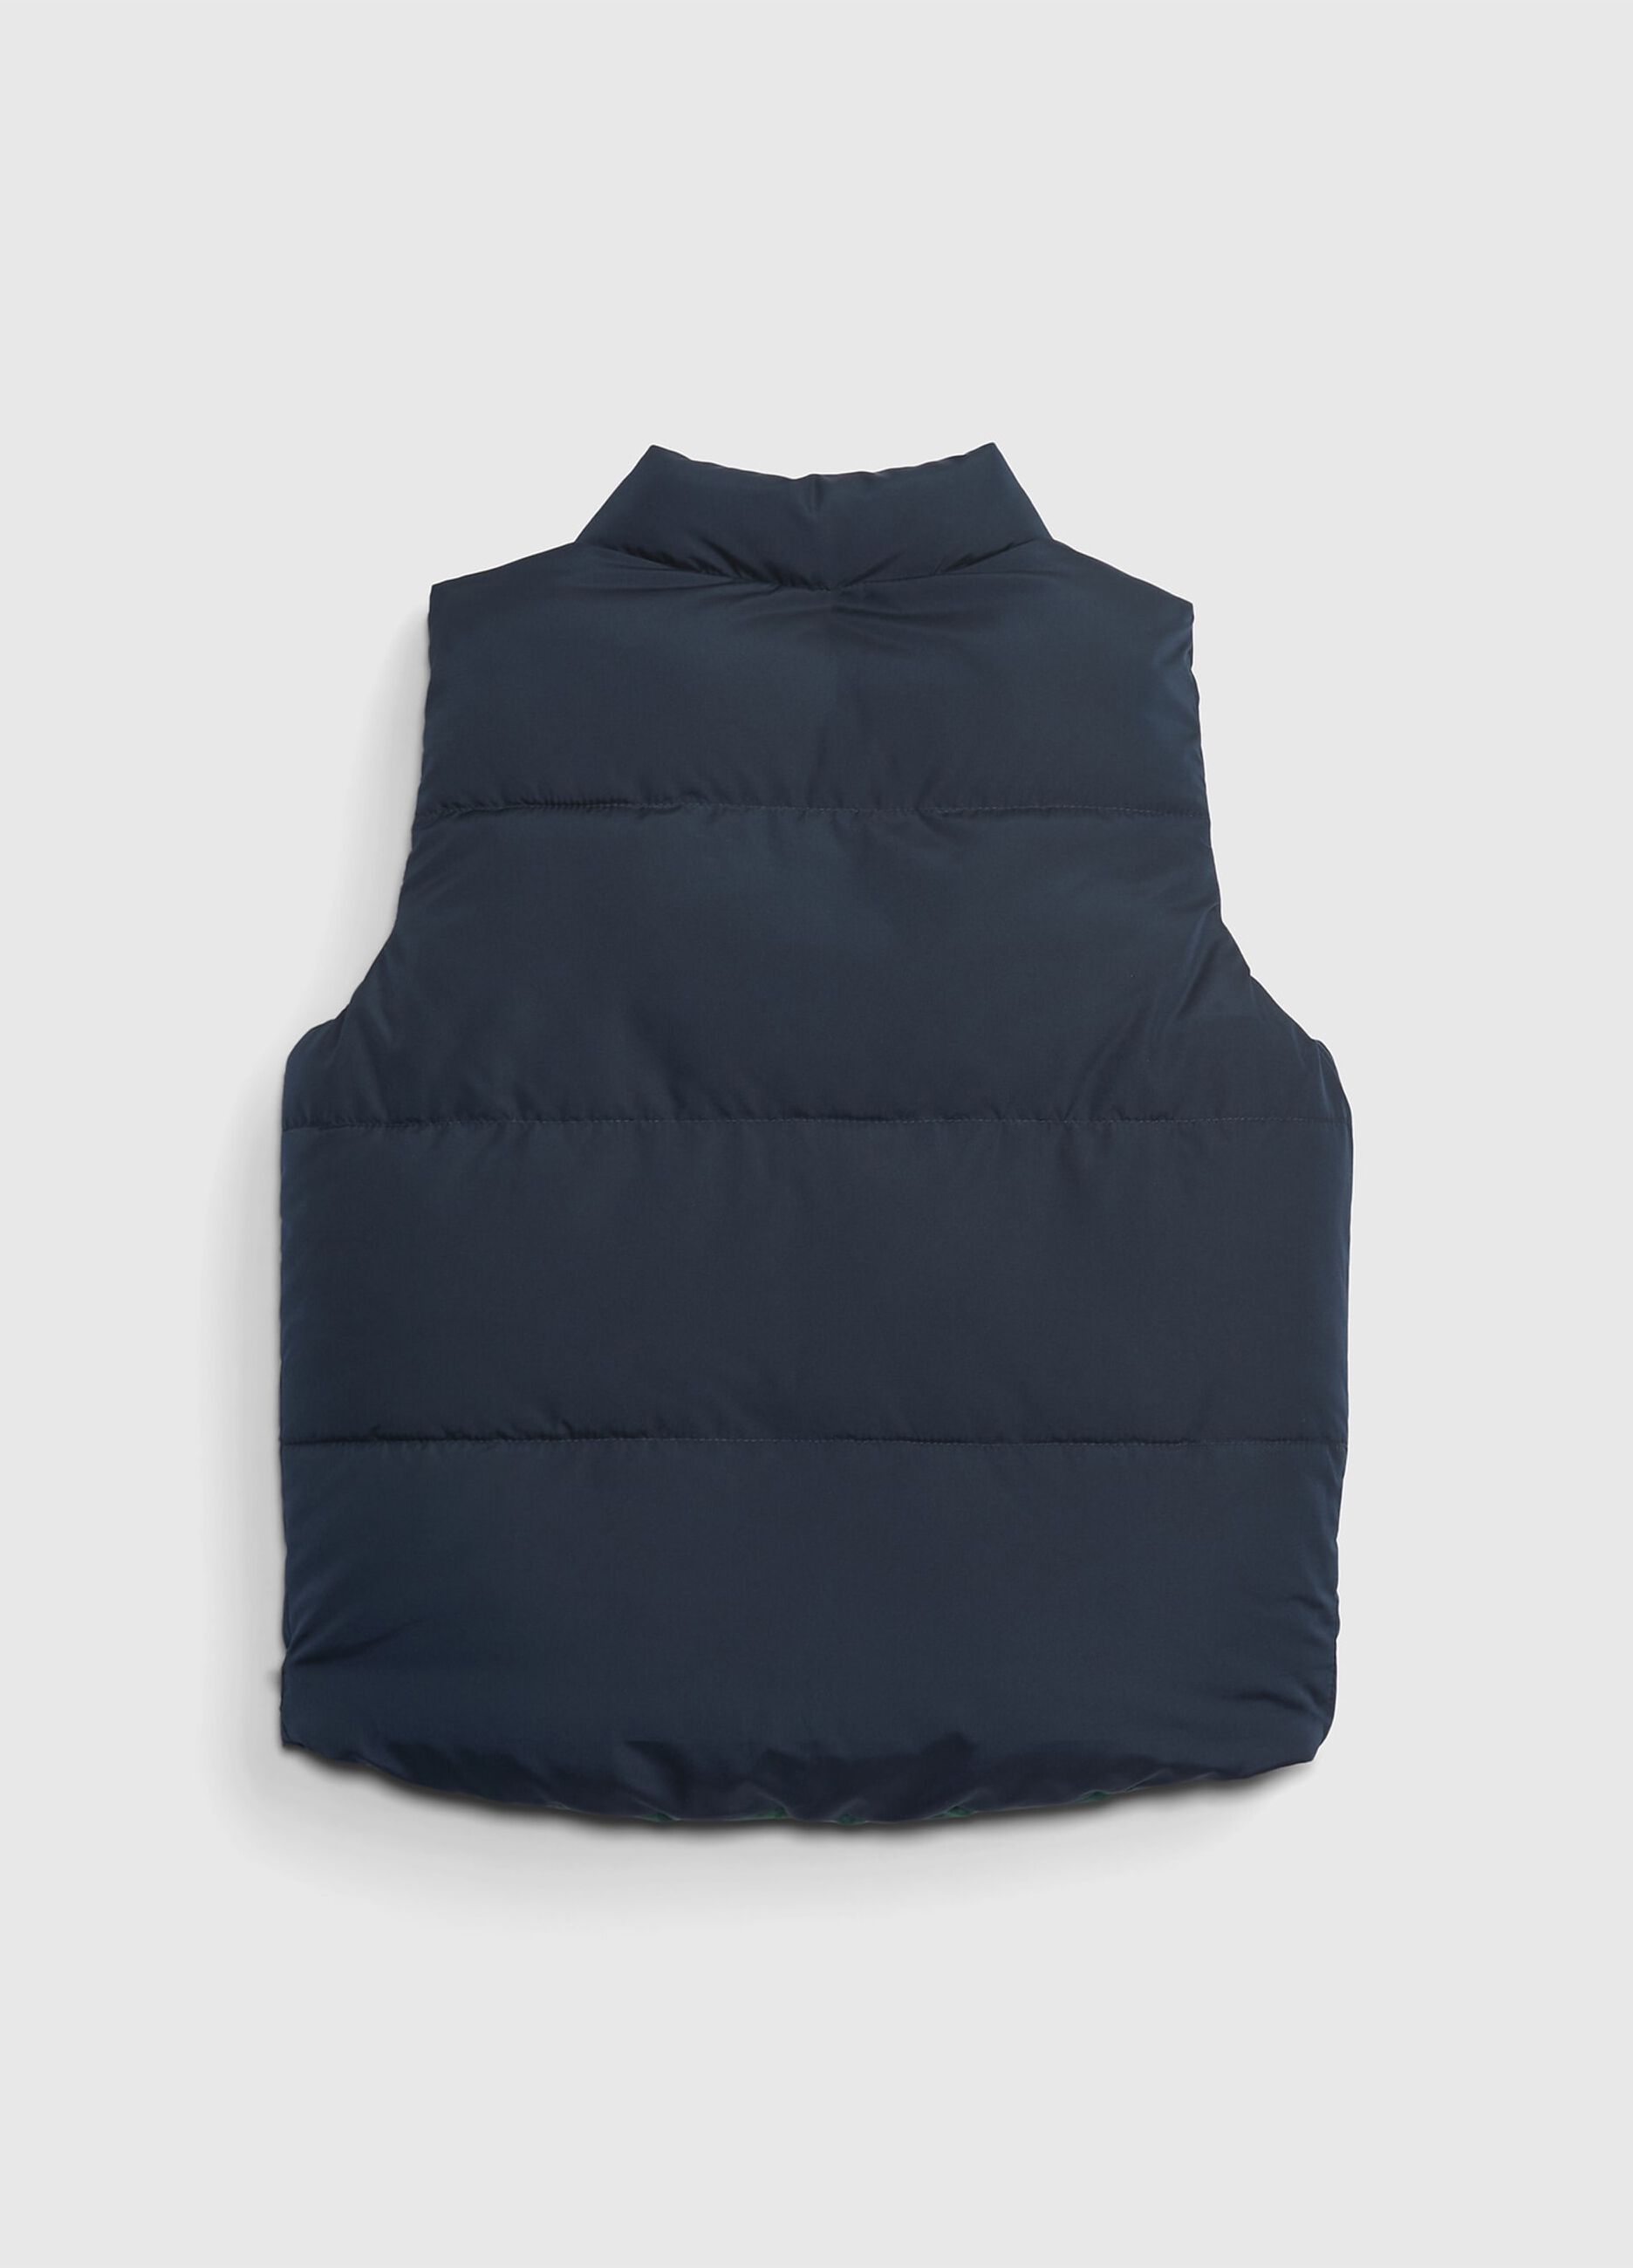 Reversible gilet with padding